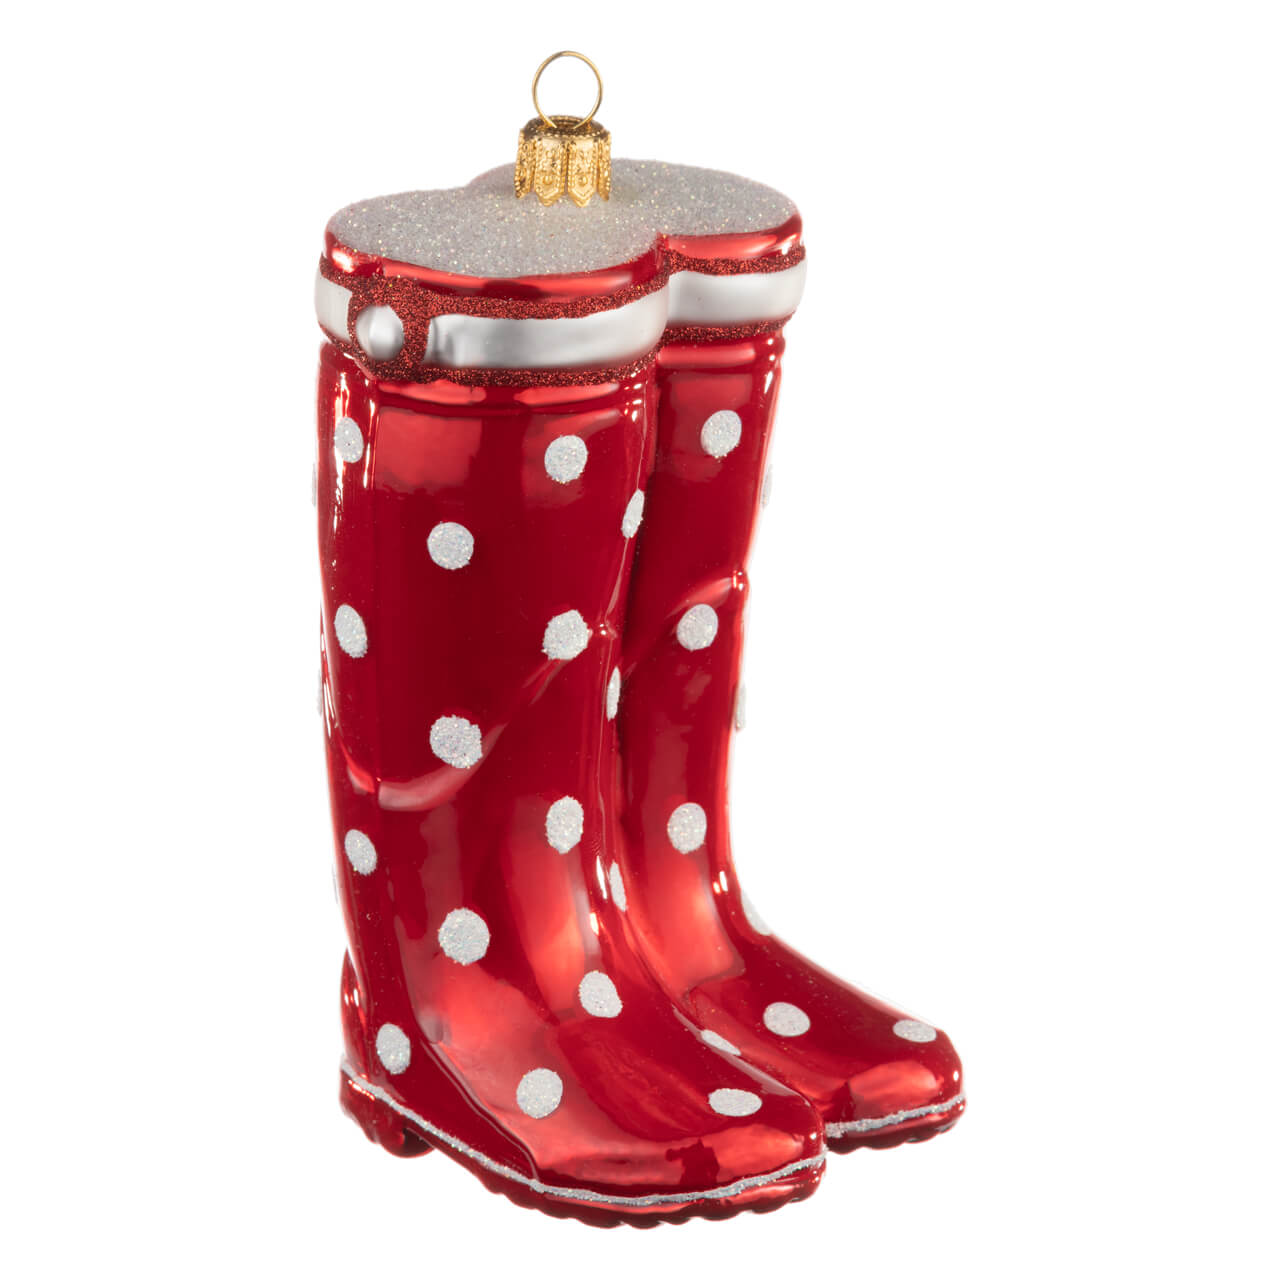 Red wellies with dots